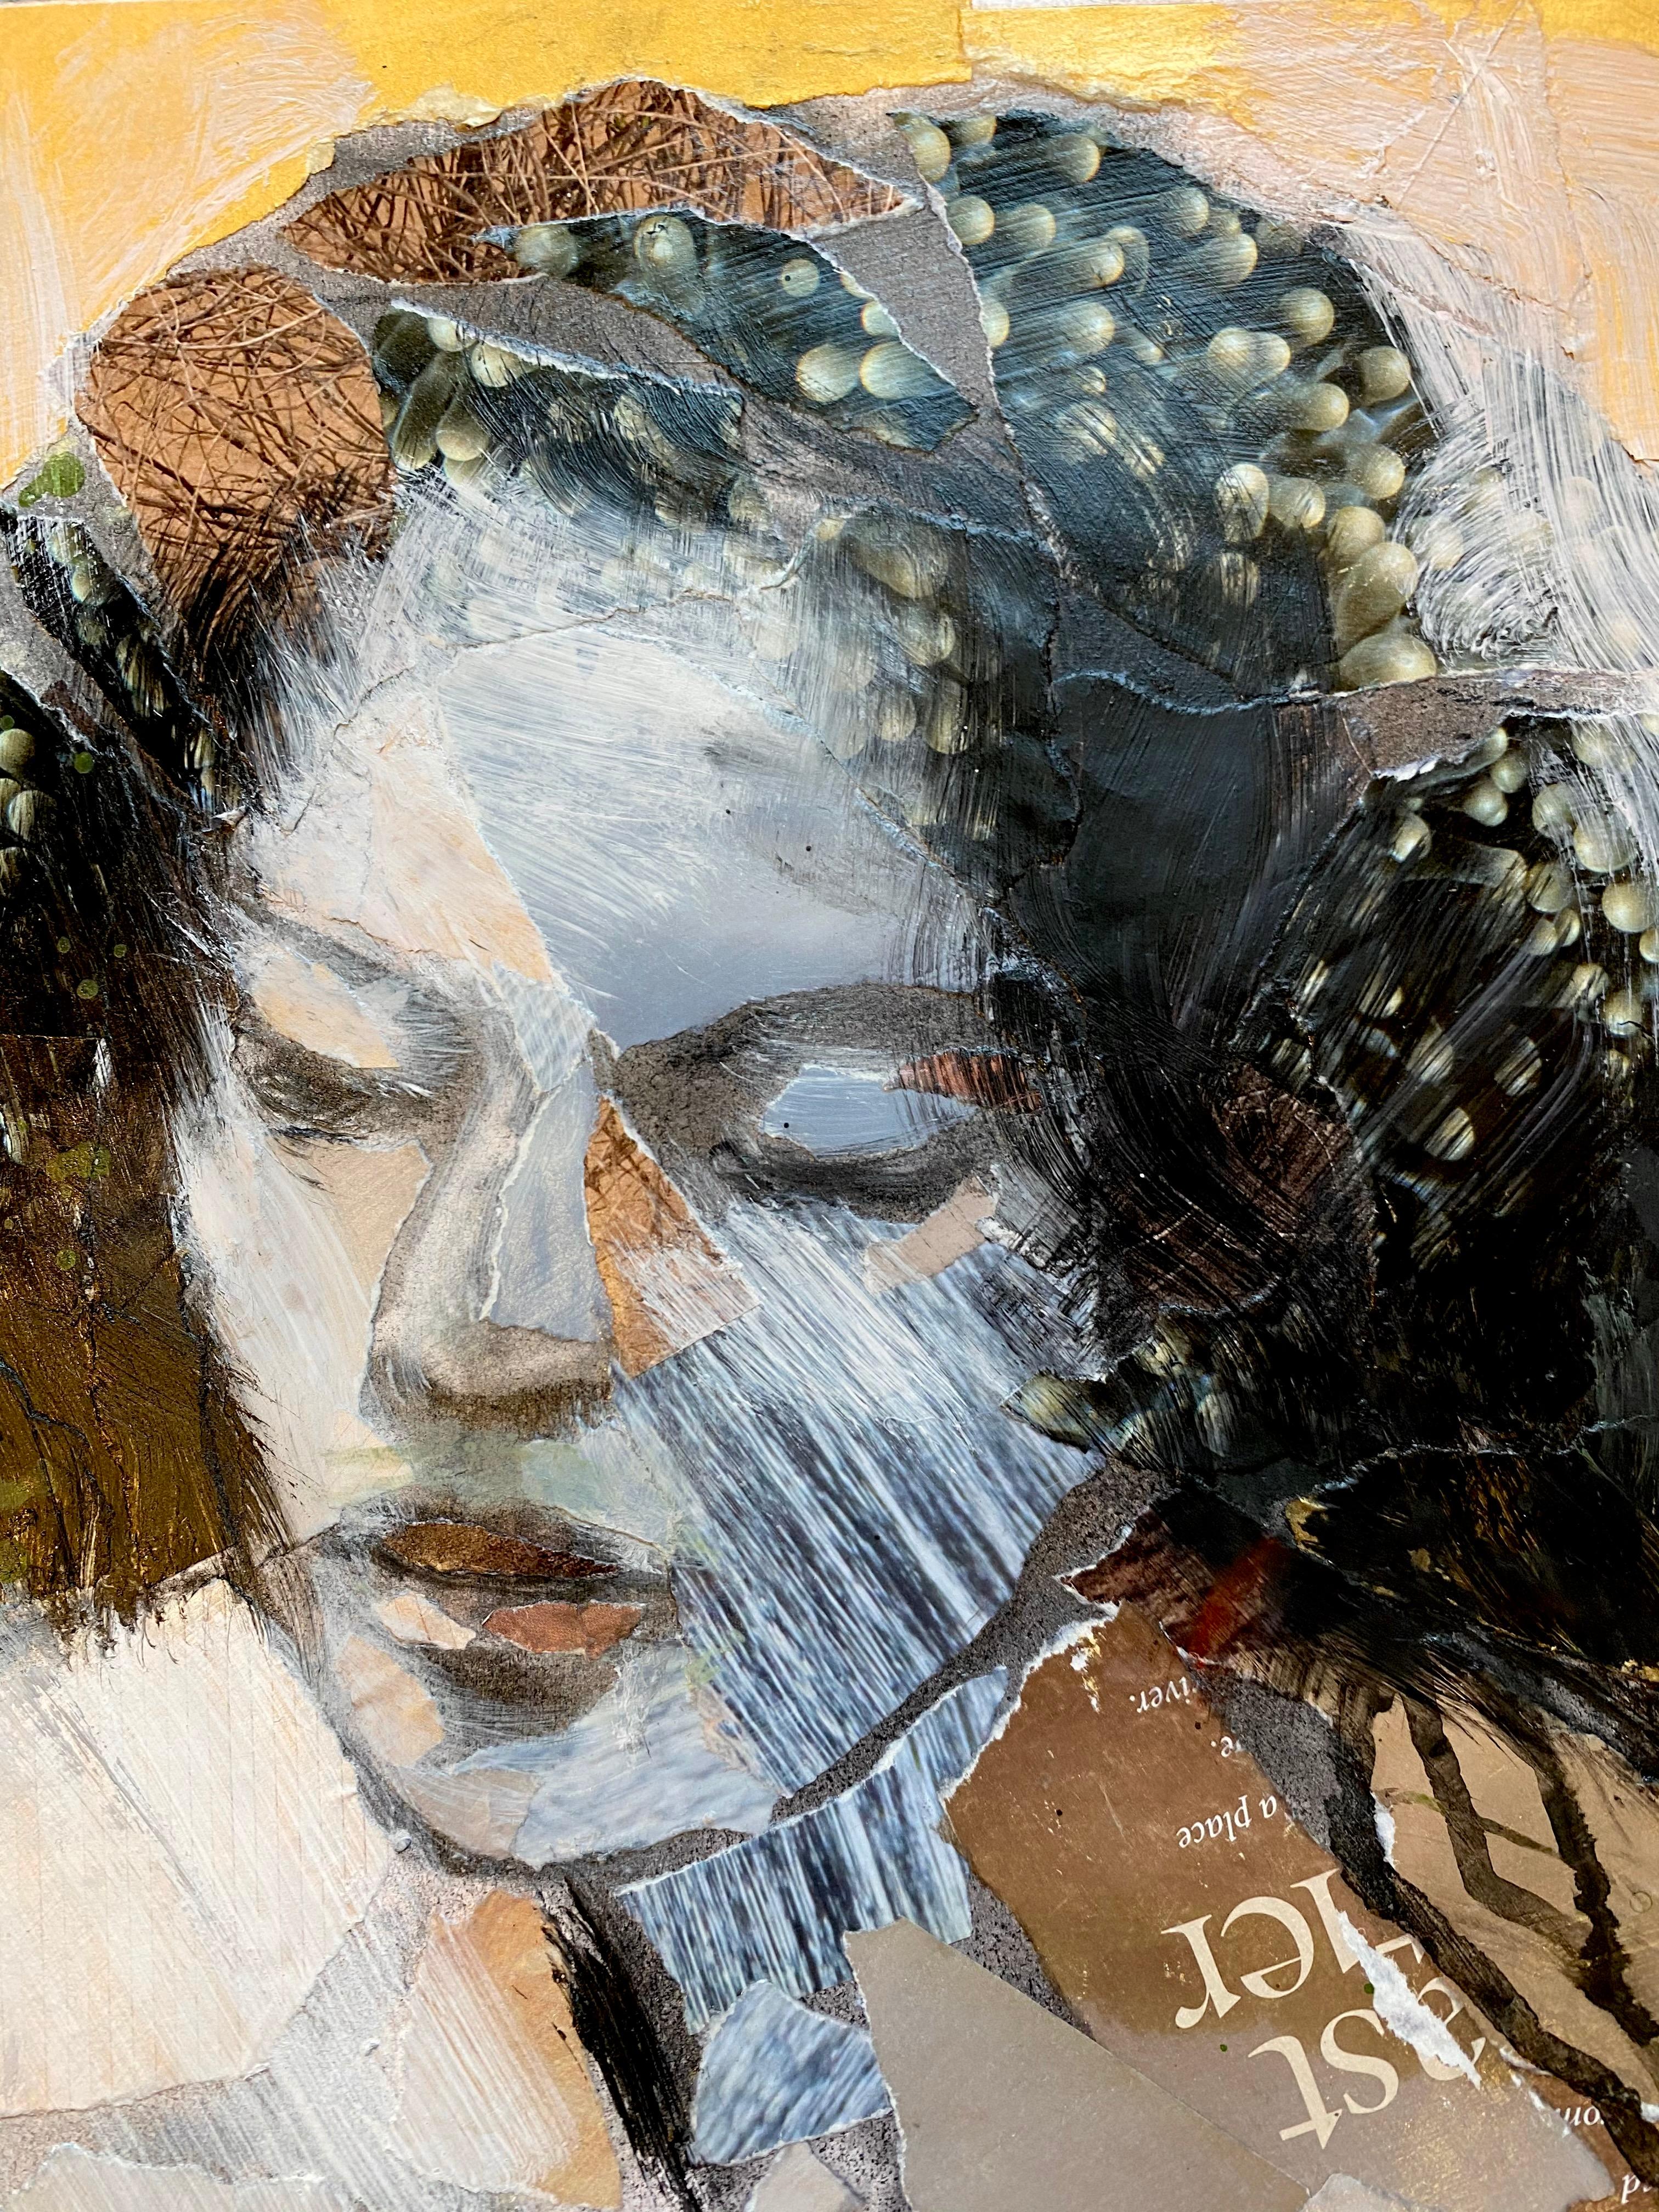 Golden Mermaid, drawing  collage female figure in water with text, maps - Art by Audrey Anastasi